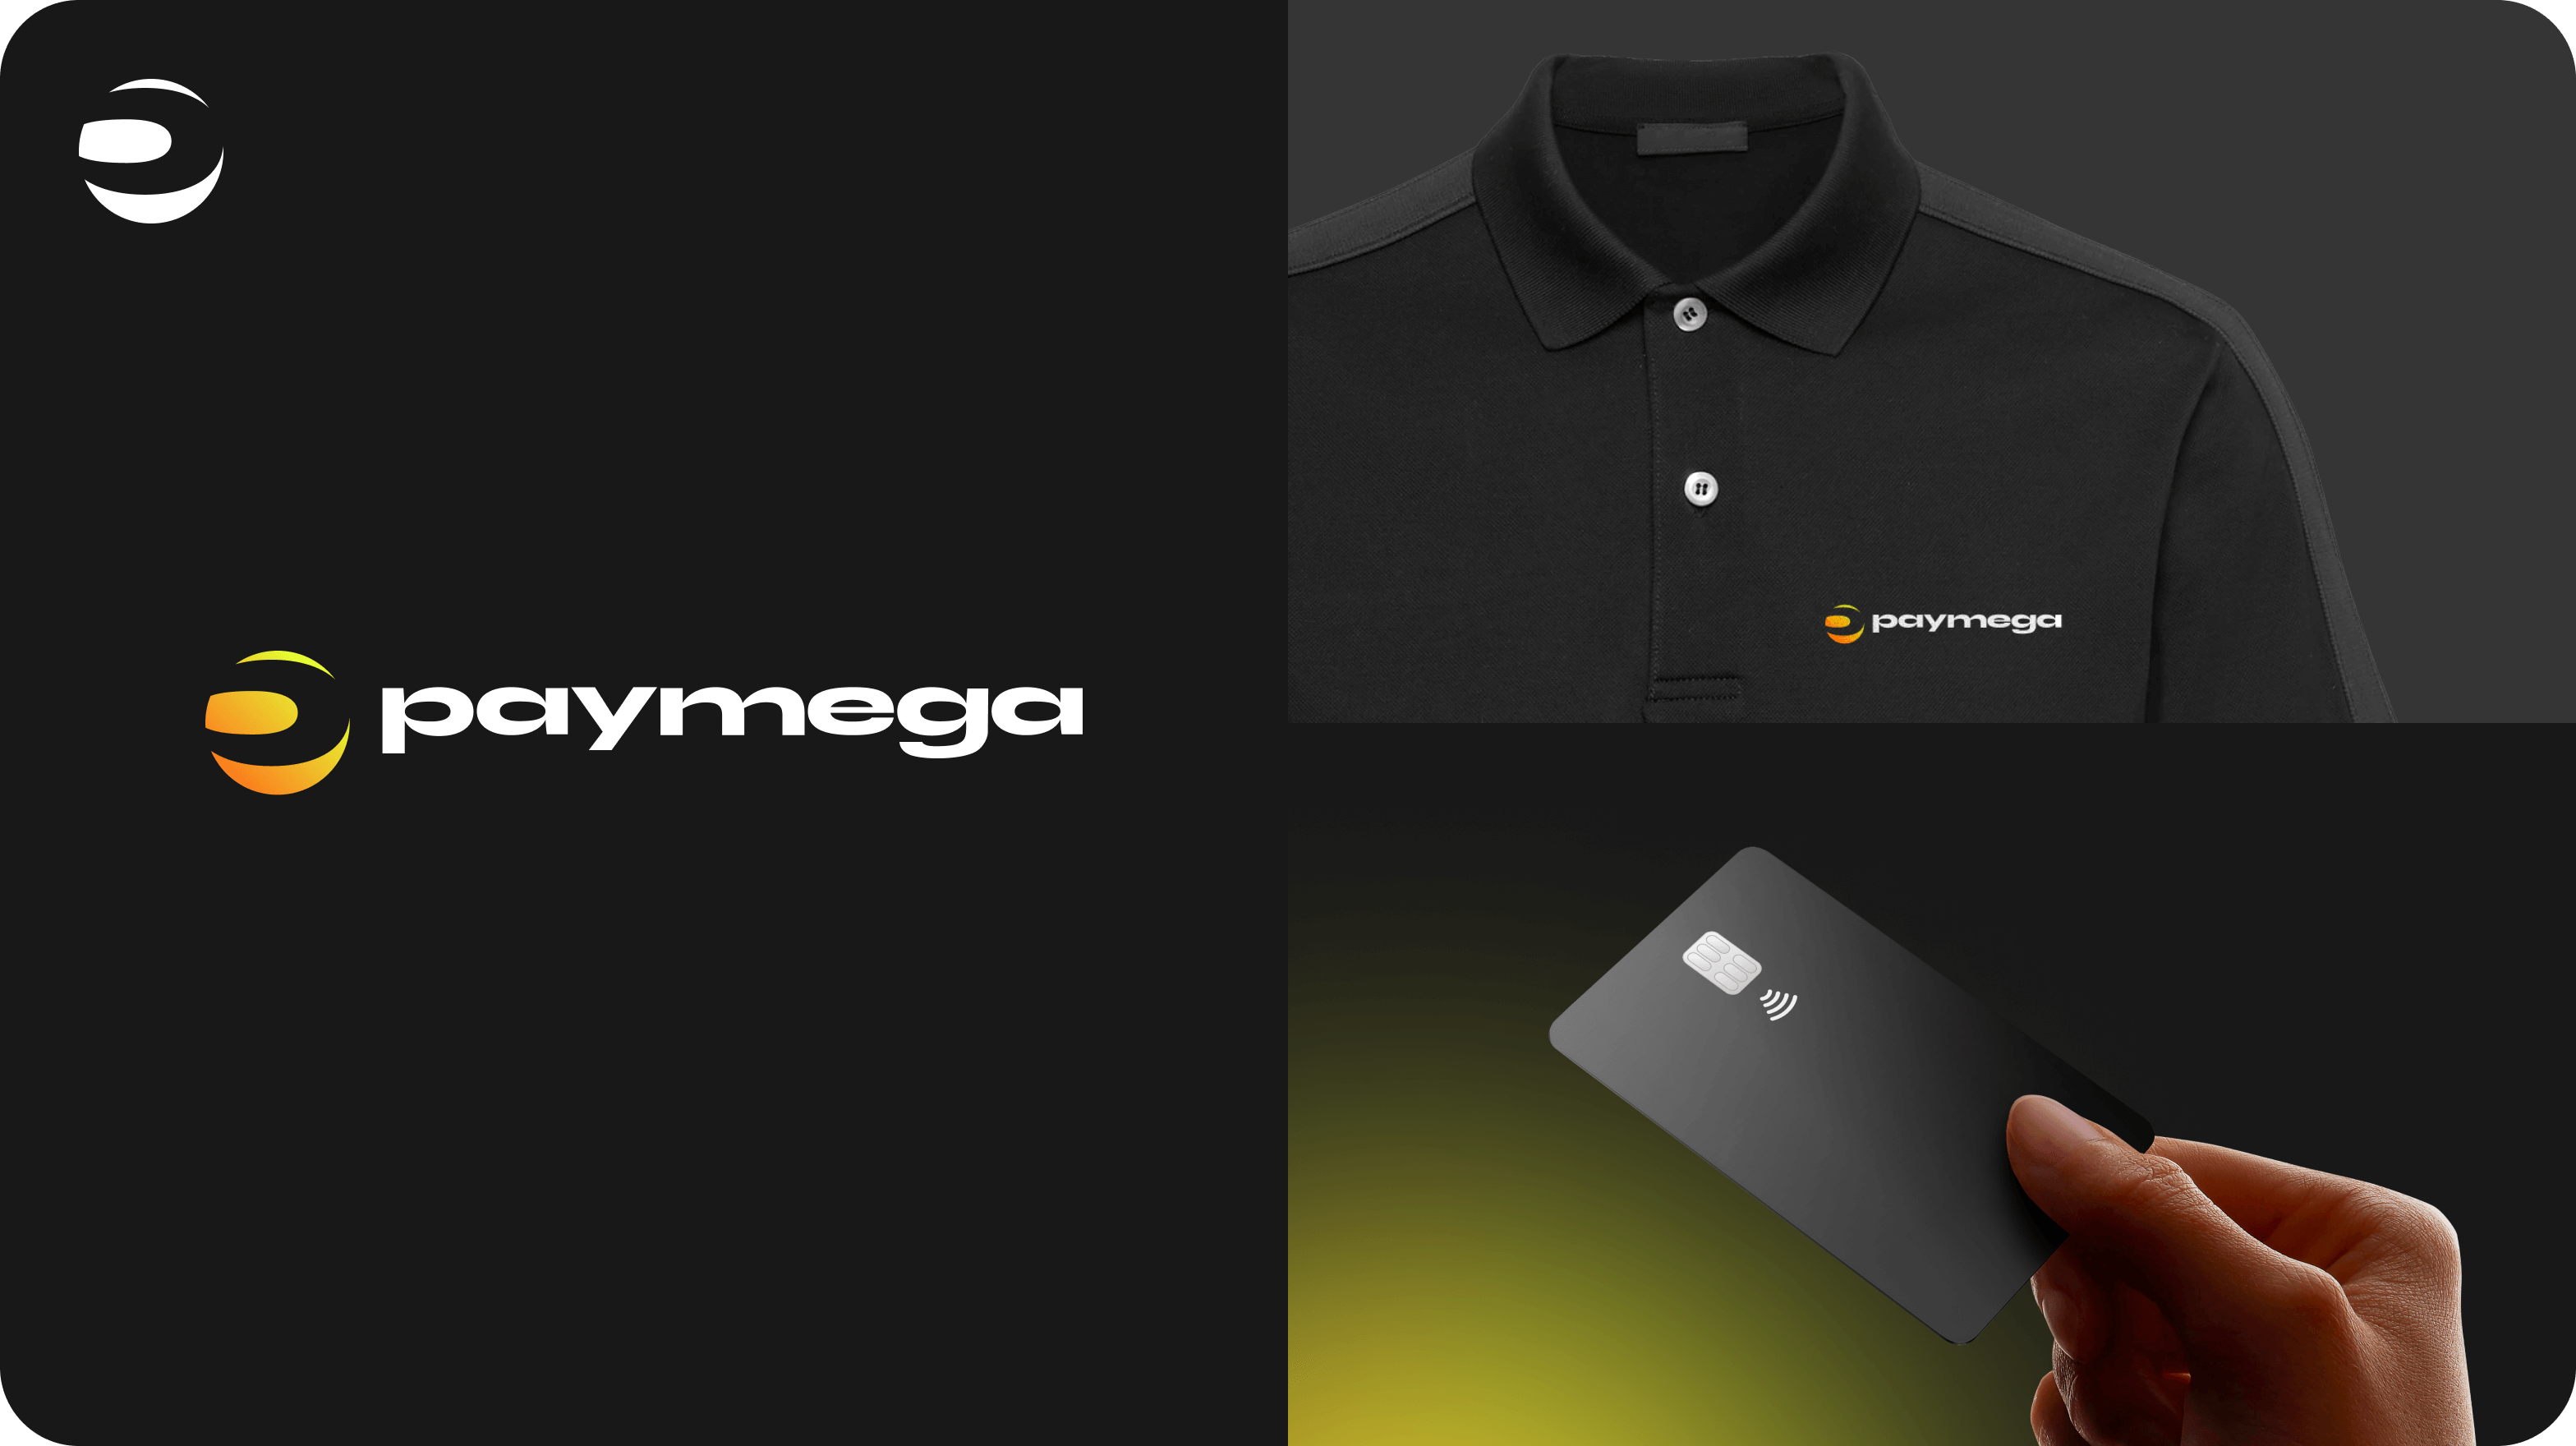 Goodface agency - Logos & brand identity - paymega case.png - Brand identity and logo design services – Goodface agency  - goodface.agency